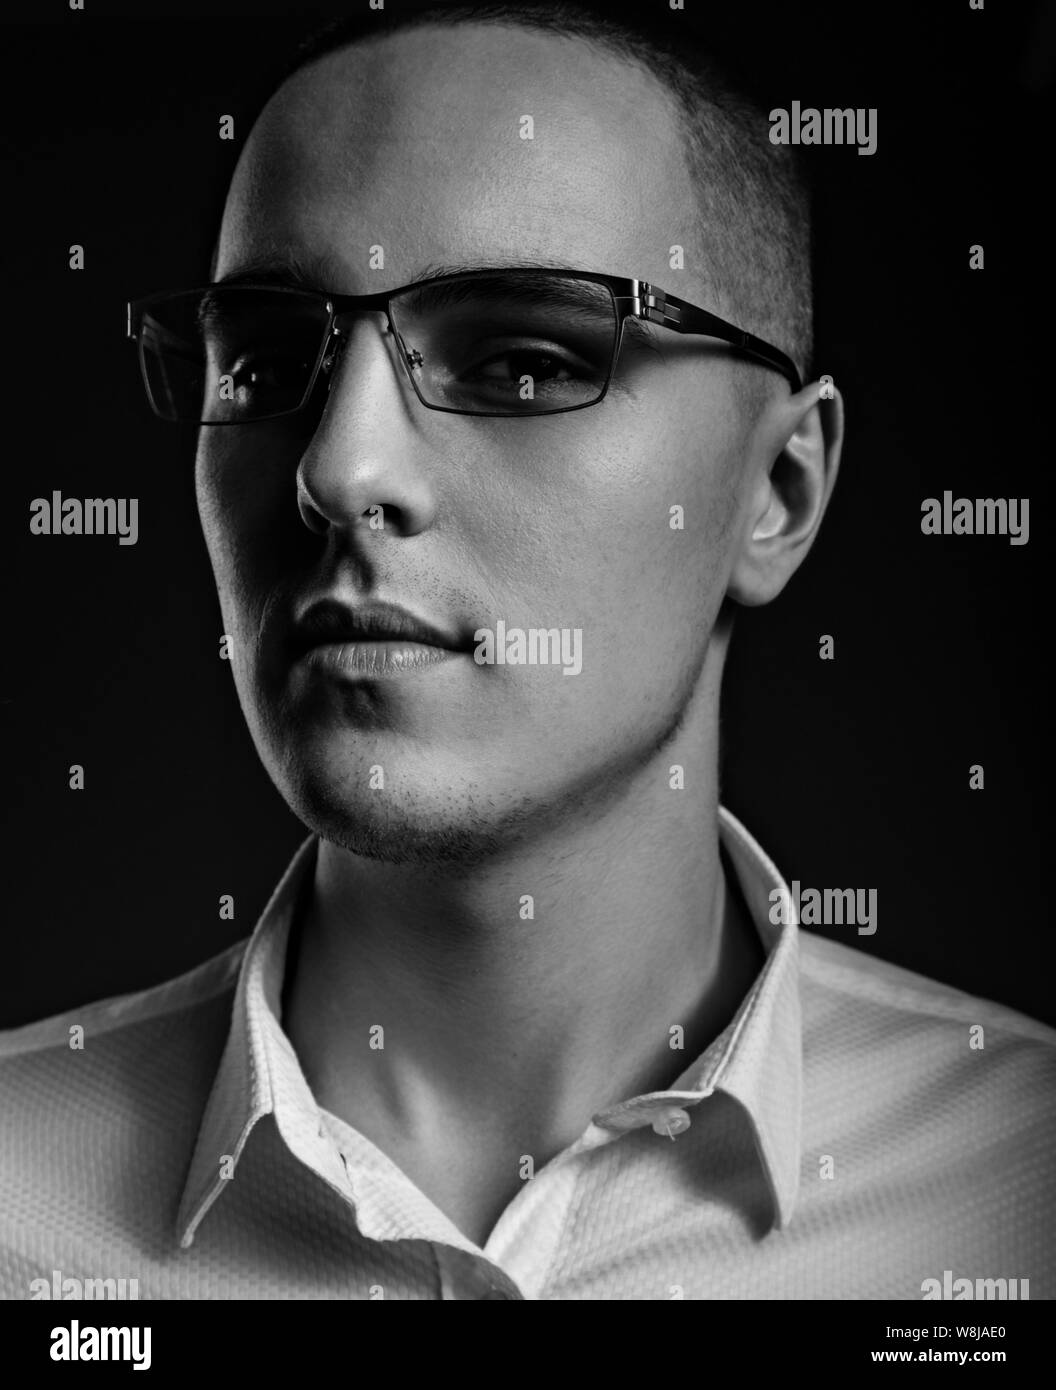 Style elegant young business man in eye glasses looking sreious and arrogant on dark shadow background. Closeup art portrait. Black and white Stock Photo